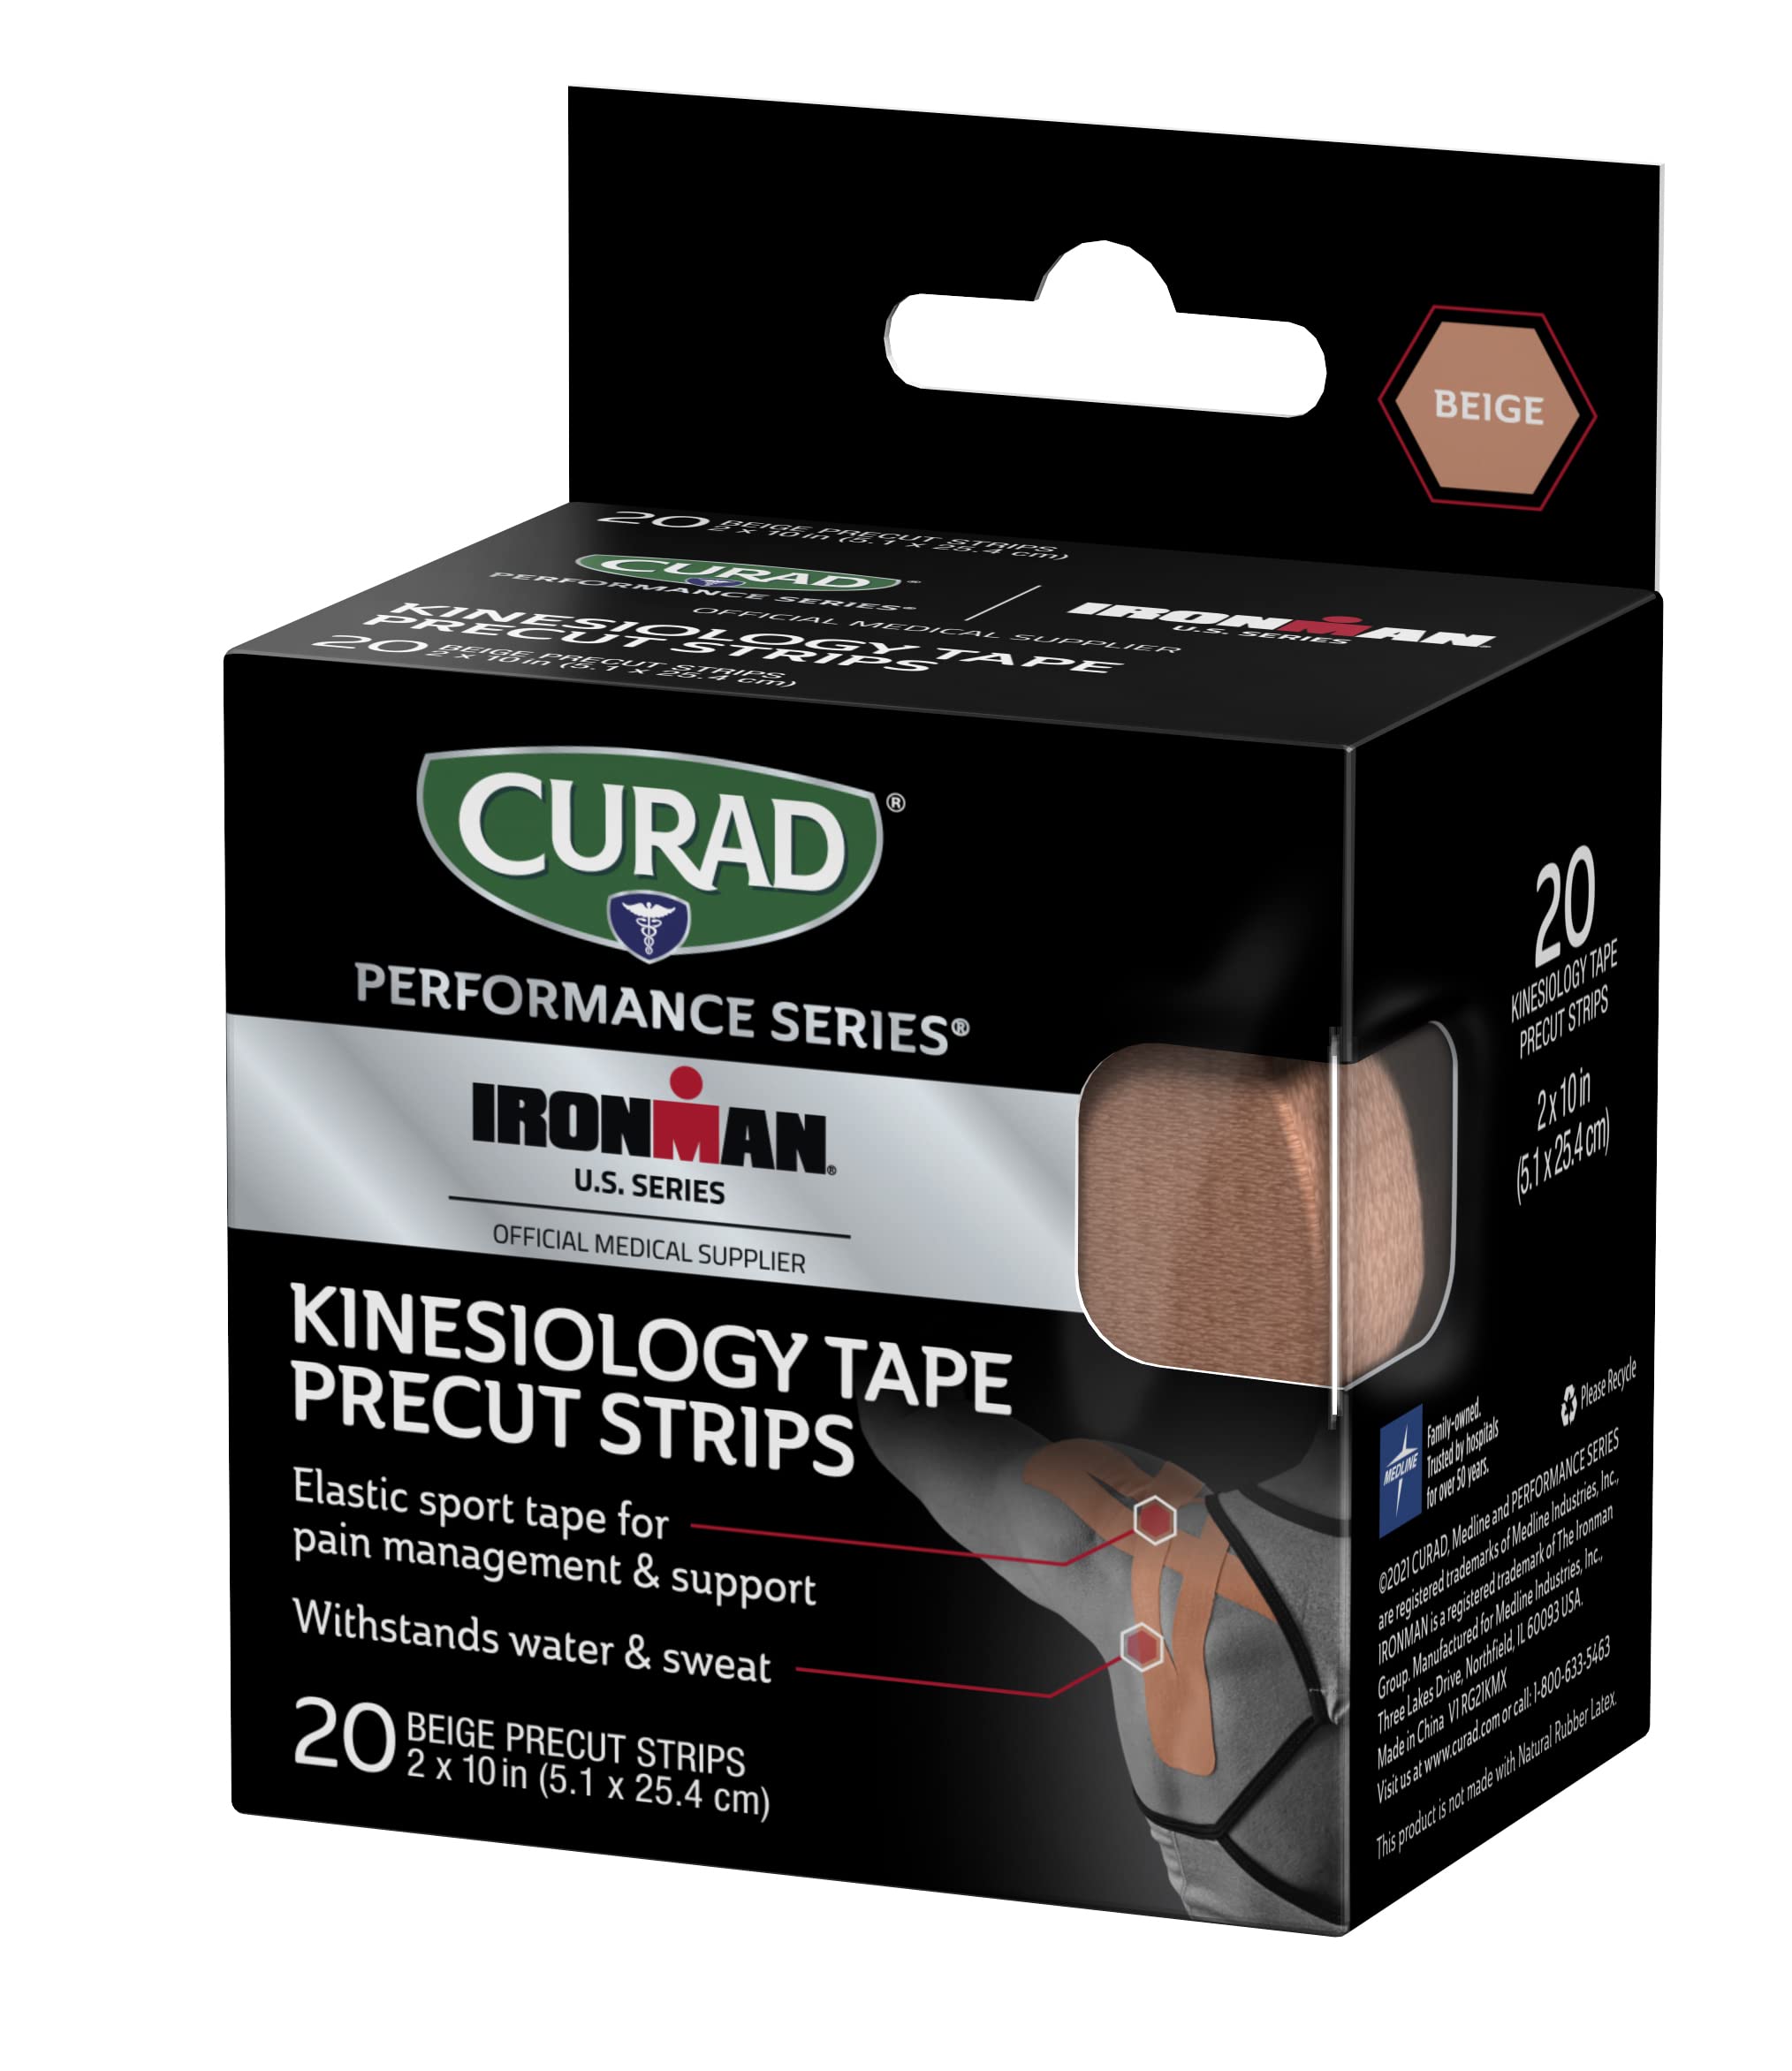 CURAD Performance Series Ironman Kinesiology Tape, Beige, 2 in x 10 in, 1 Roll of 20 Precut Strips